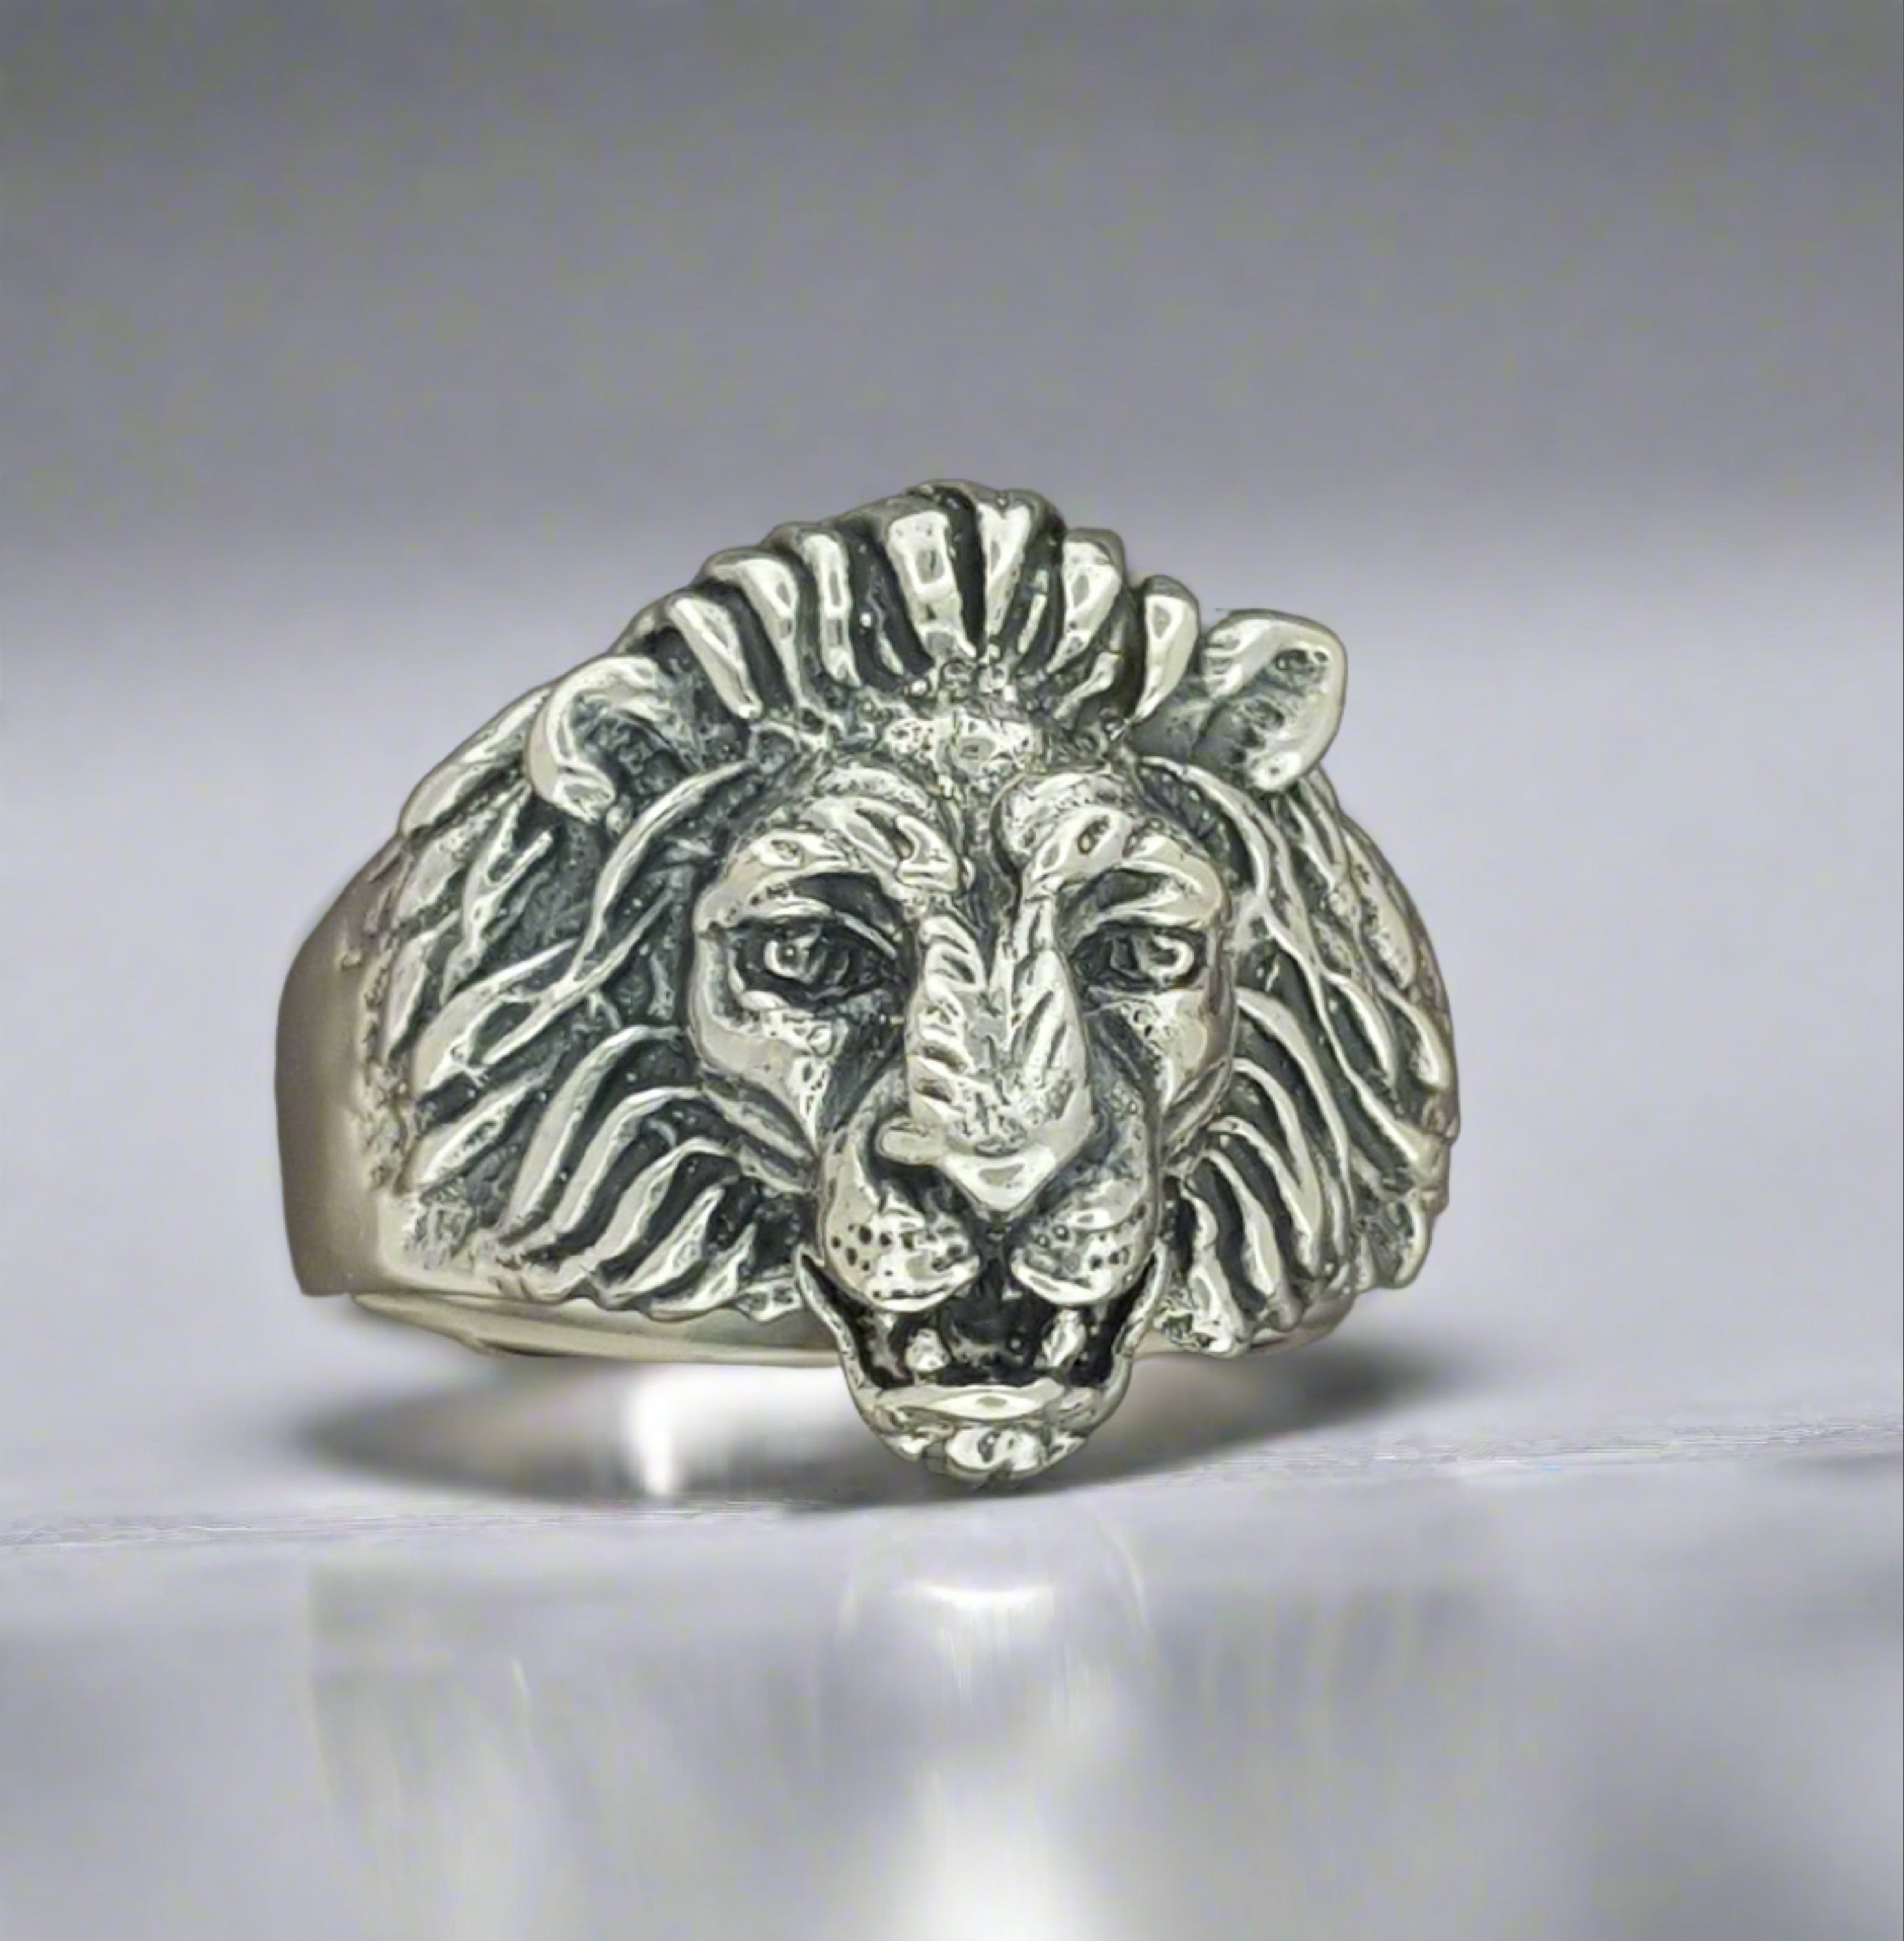 1950s Vintage Style Classic Lion Ring in Sterling Silver or Antique Br ...